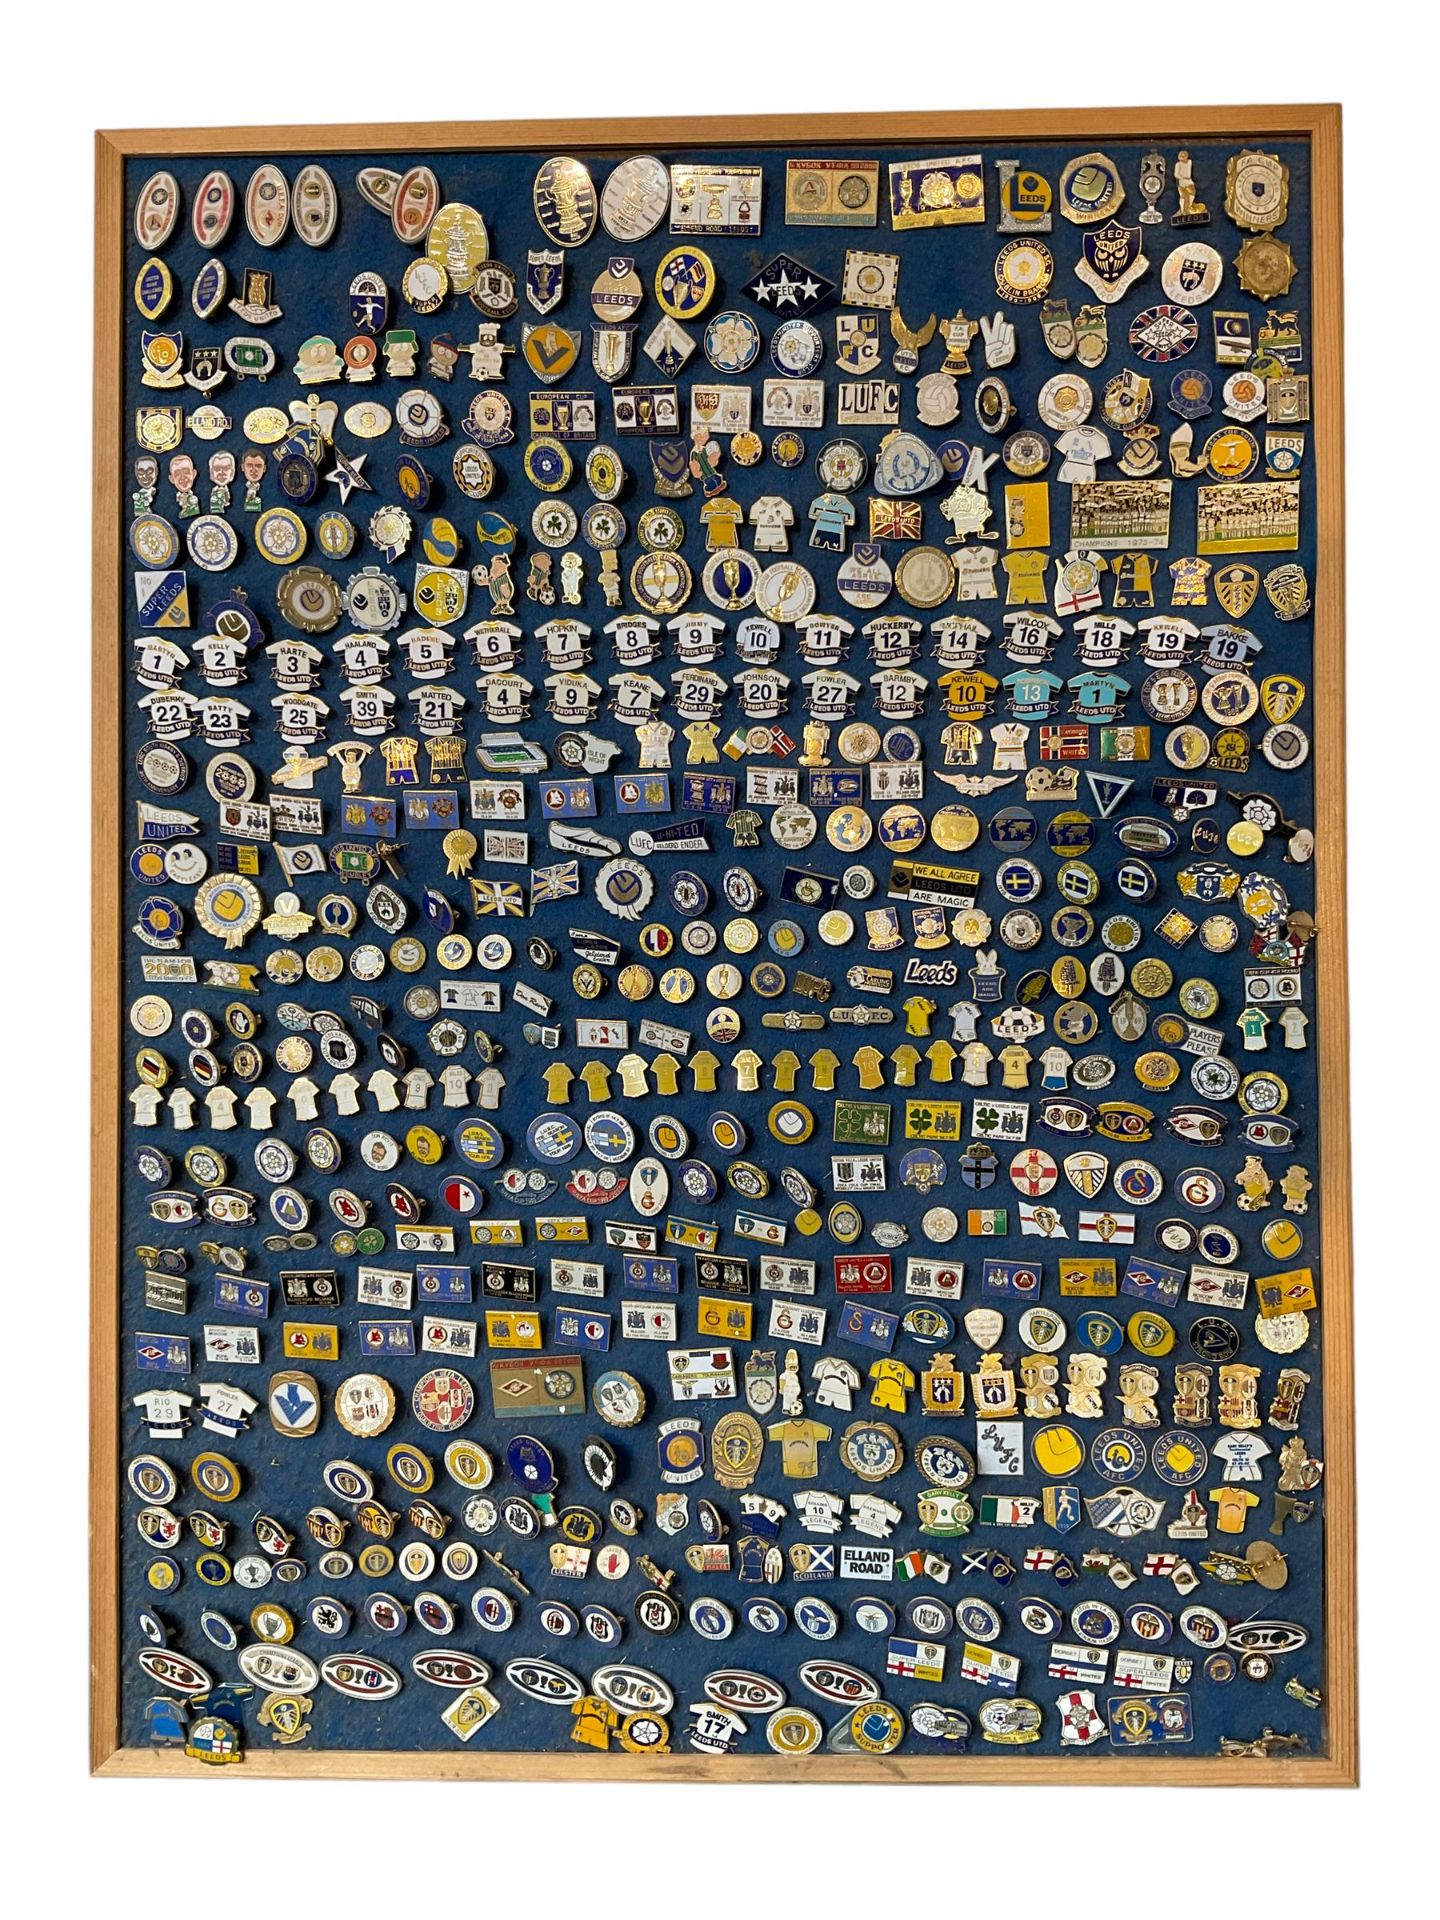 Leeds United football club - approximately six-hundred pin badges including player badges (Billy Bre